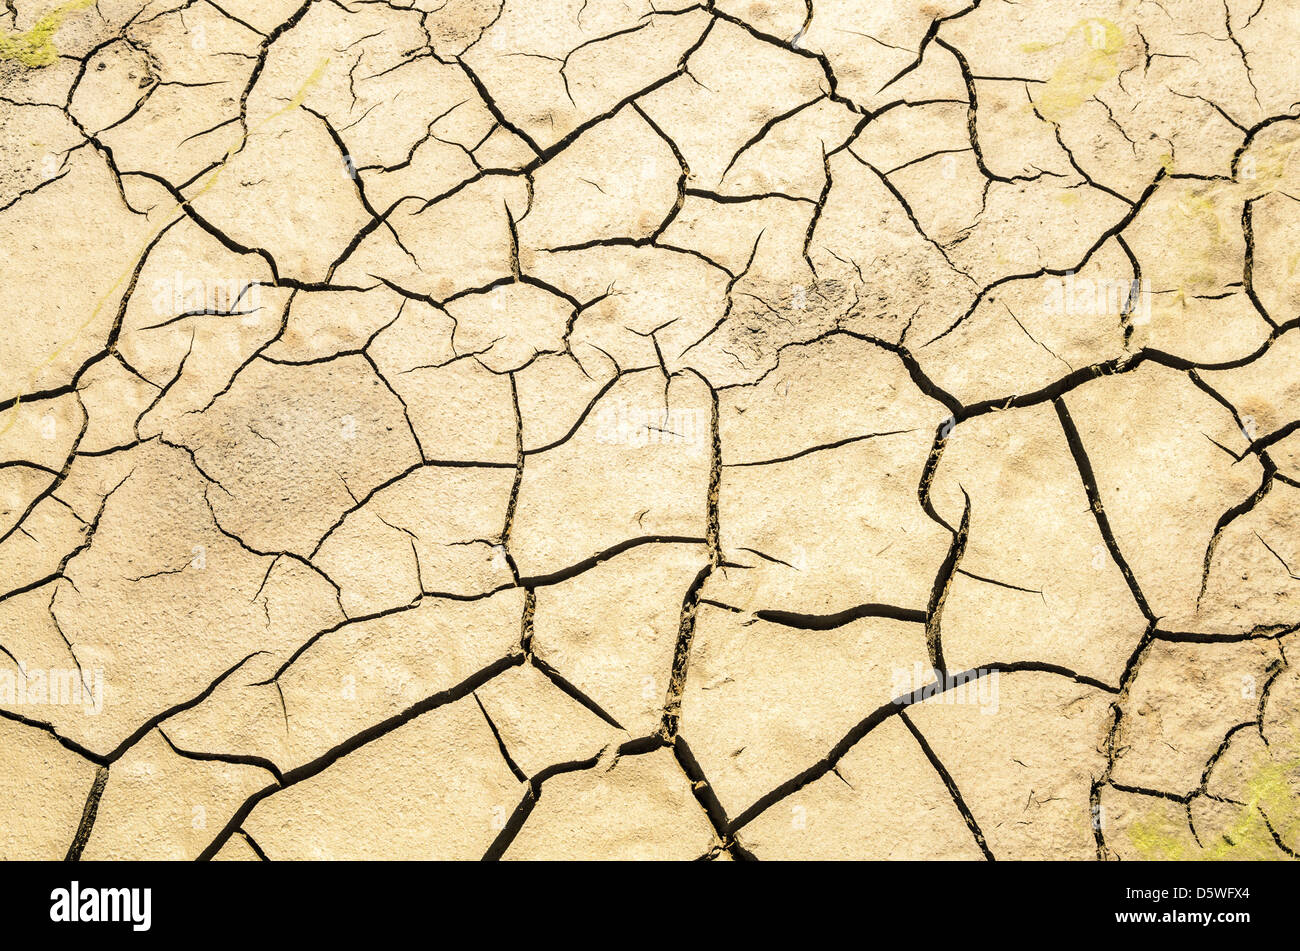 Dried and cracked mud during a drought. Stock Photo